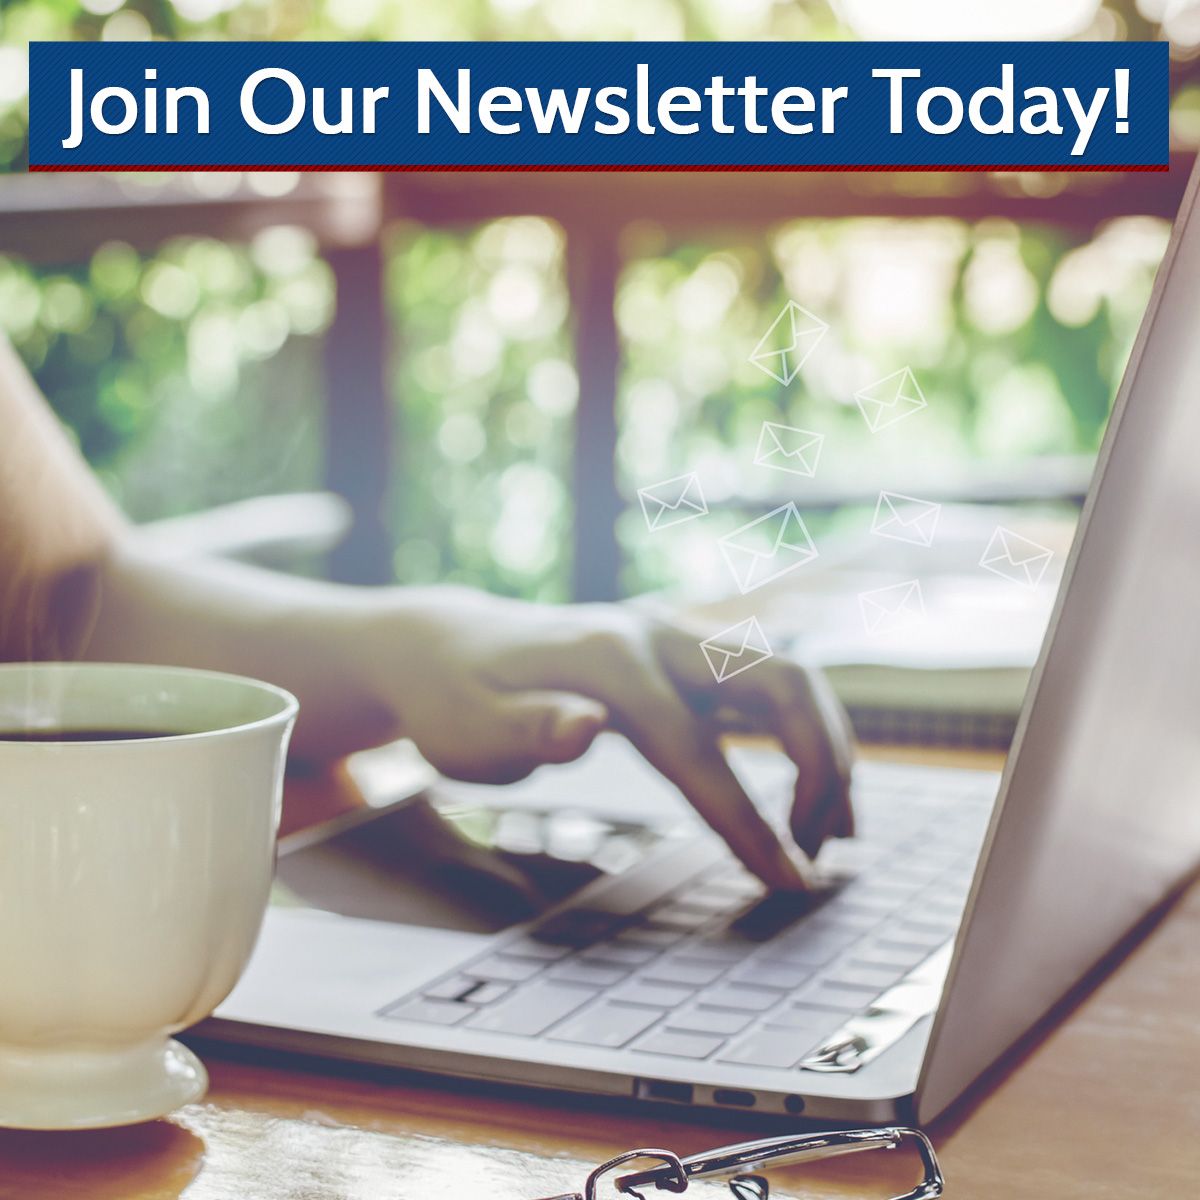 Join Our Newsletter Today!